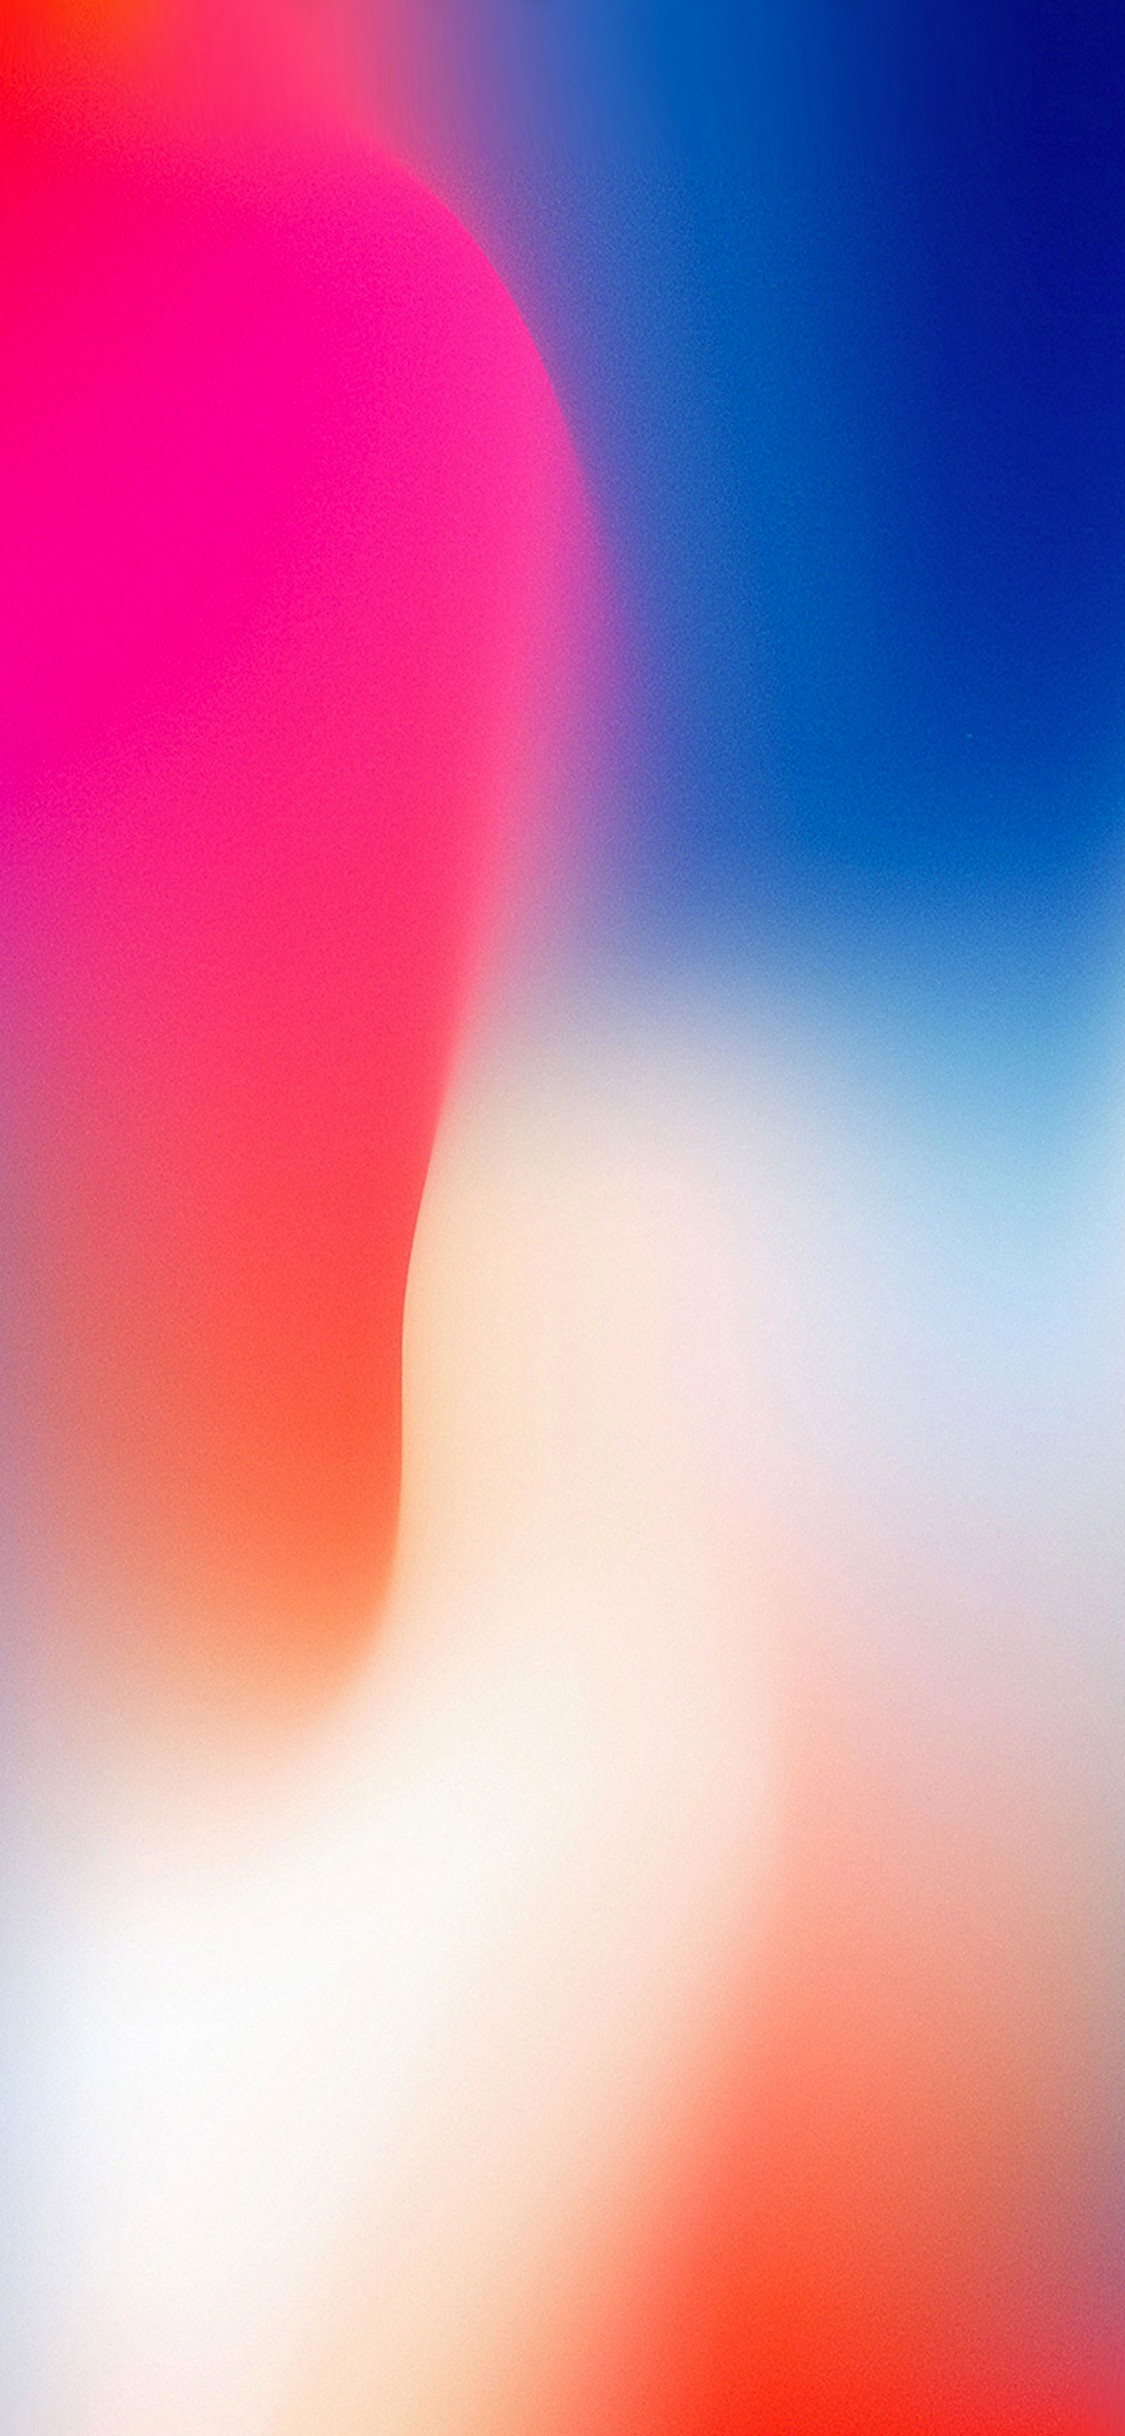 iPhone X Wallpaper With high-resolution 1125X2436 pixel. You can set as wallpaper for Apple iPhone X, XS Max, XR, 8, 7, 6, SE, iPad. Enjoy and share your favorite HD wallpapers and background images